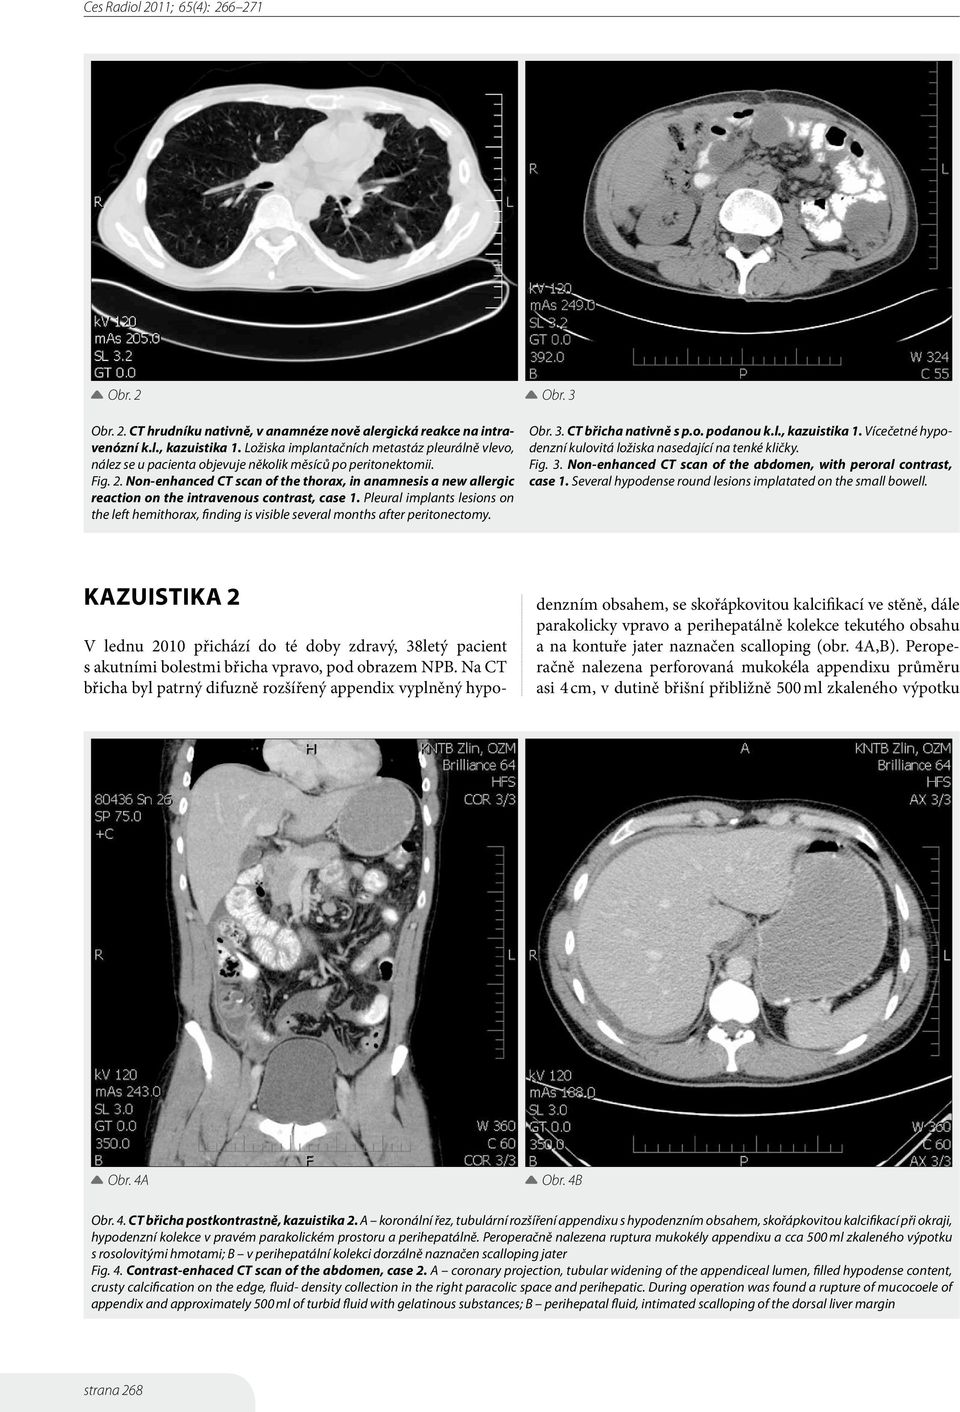 Non-enhanced CT scan of the thorax, in anamnesis a new allergic reaction on the intravenous contrast, case 1.